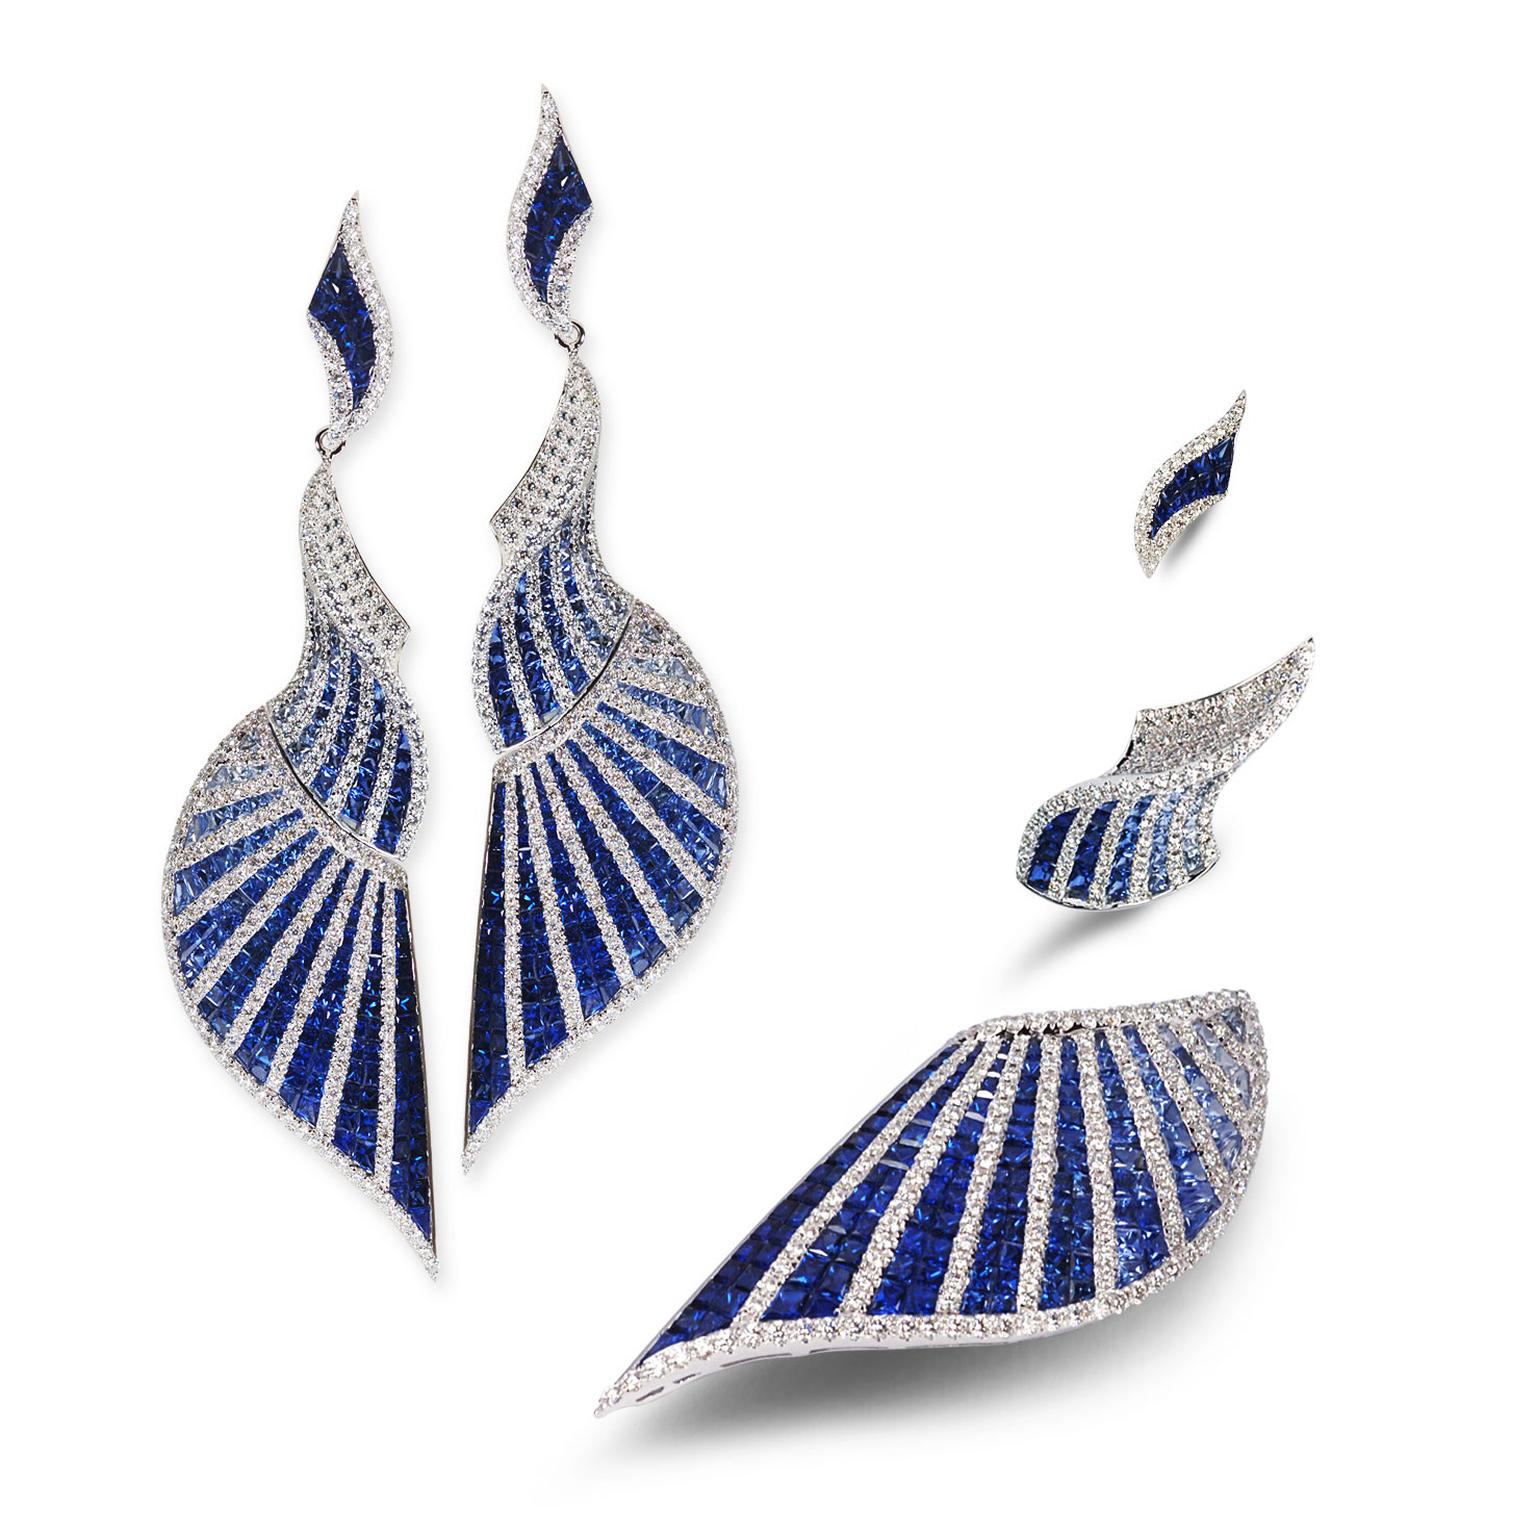 Kavant and Sharart white gold, diamond and blue sapphire earrings